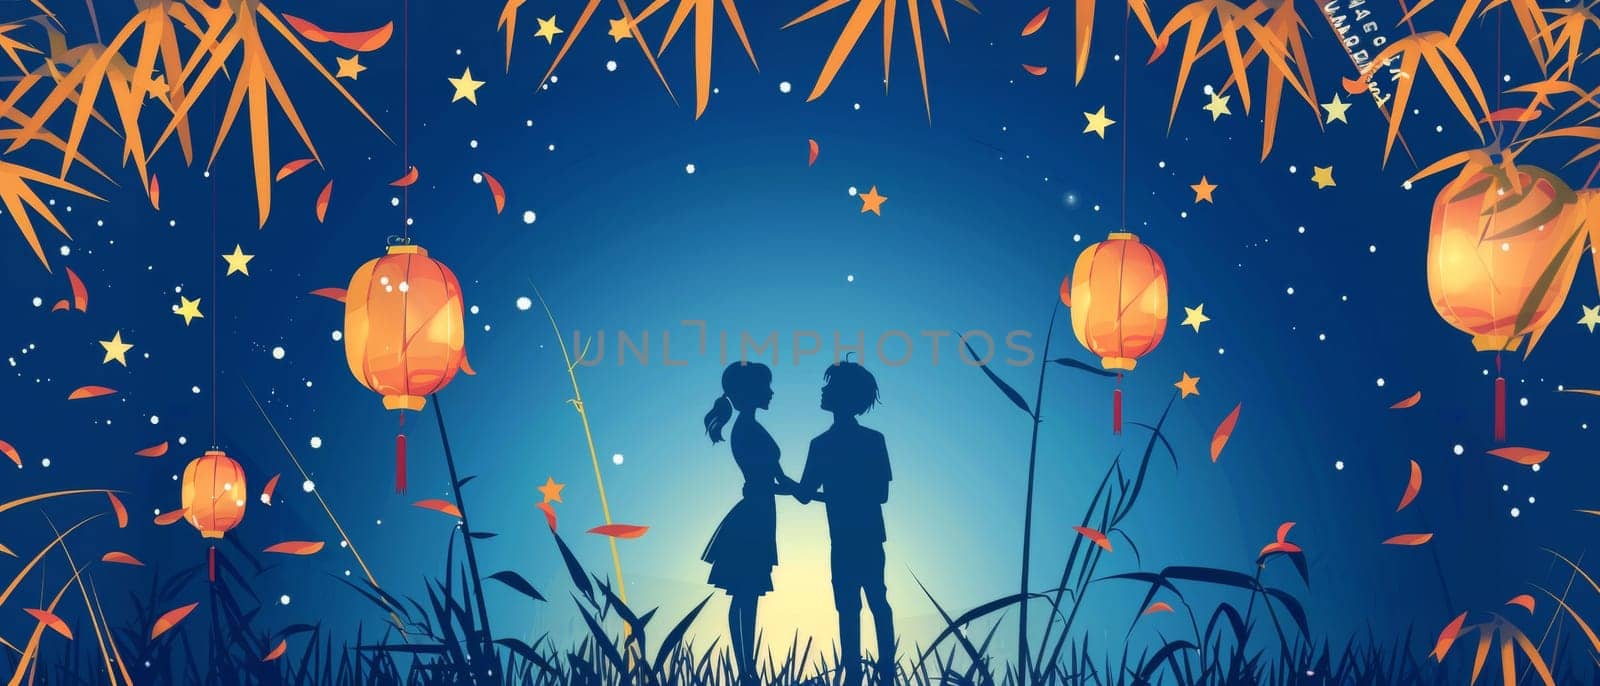 A whimsical scene of two children playing under lantern-lit skies, with falling leaves and a backdrop of bamboo